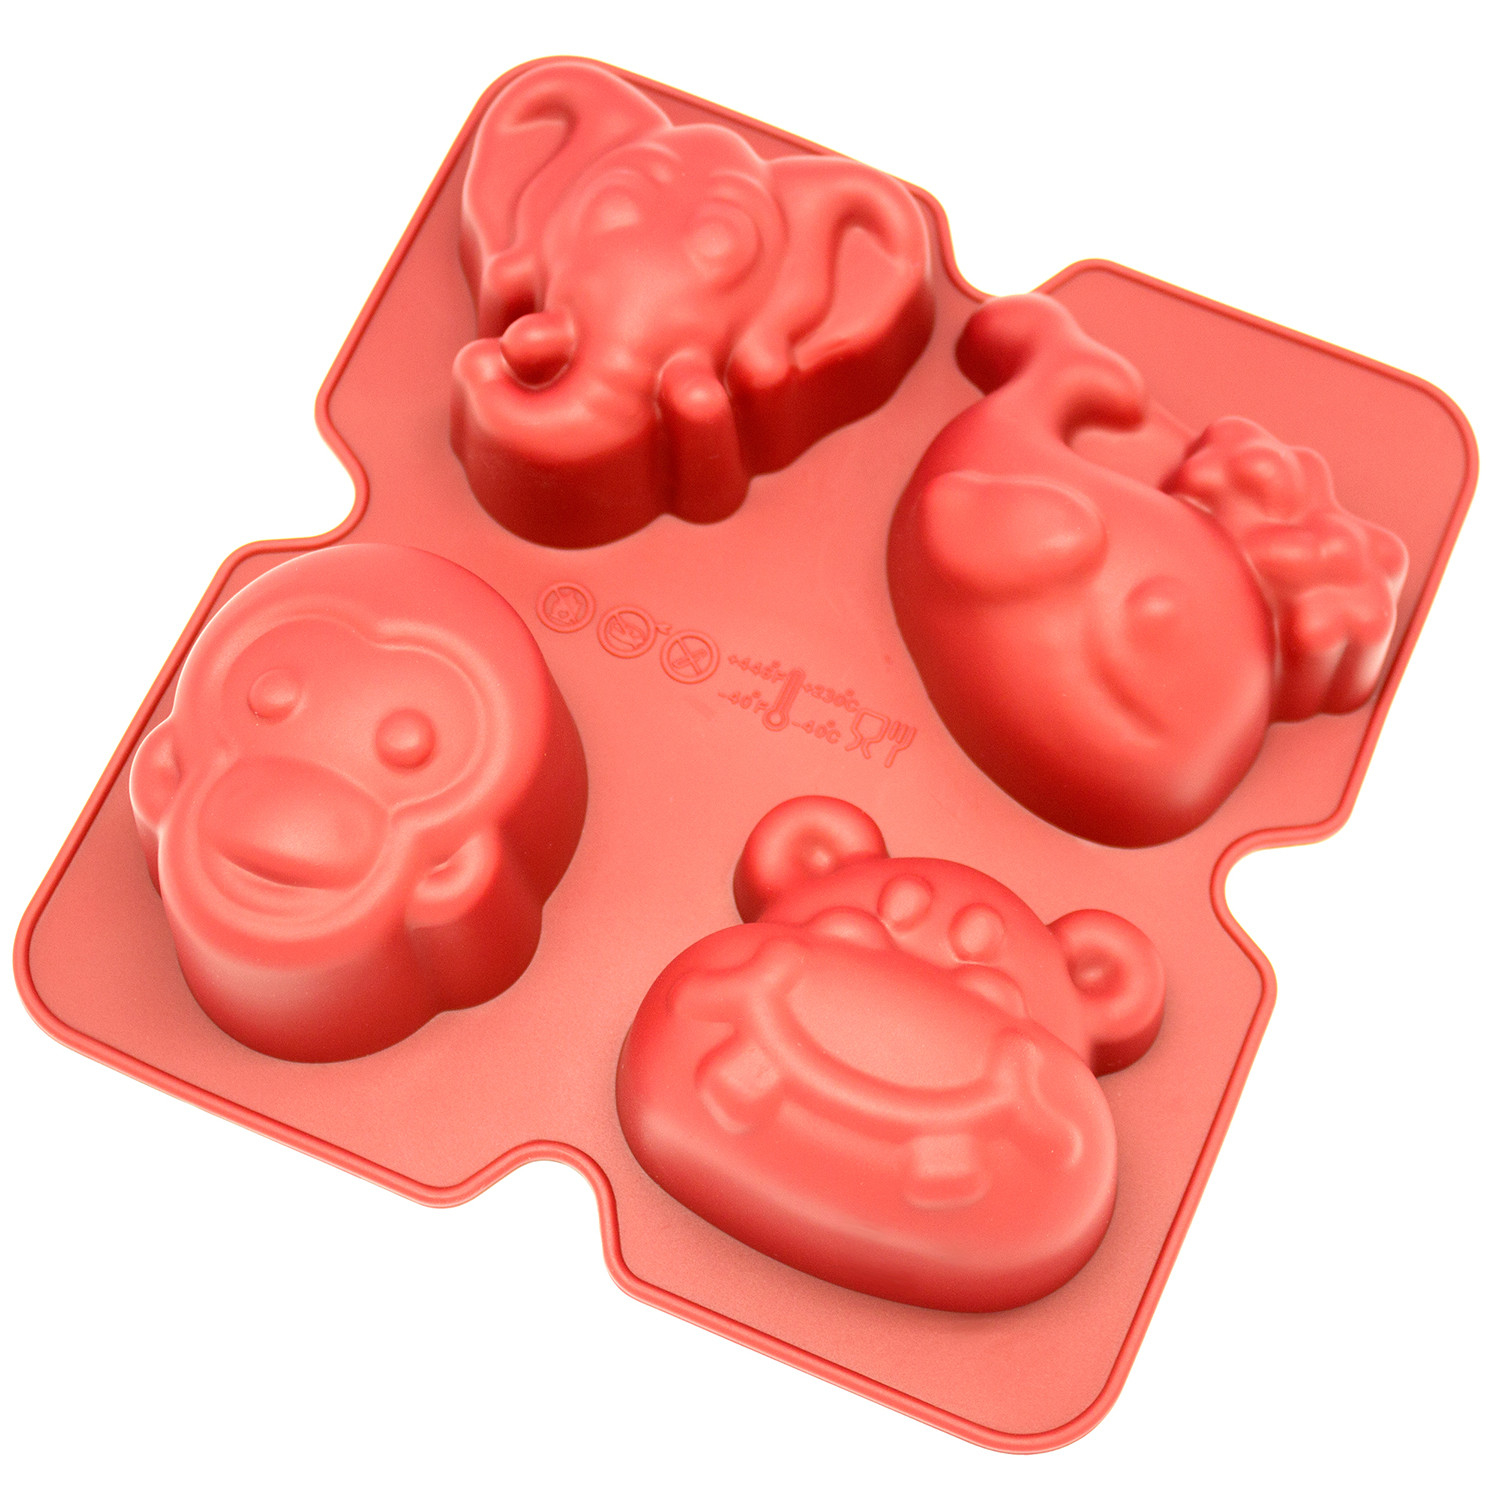 Freshware Silicone Mold, Soap Mold for Pudding, Muffin, Cupcake, Cheesecake and Soap, Elephant, Monkey, Hippo and Whale, 4-Cavity